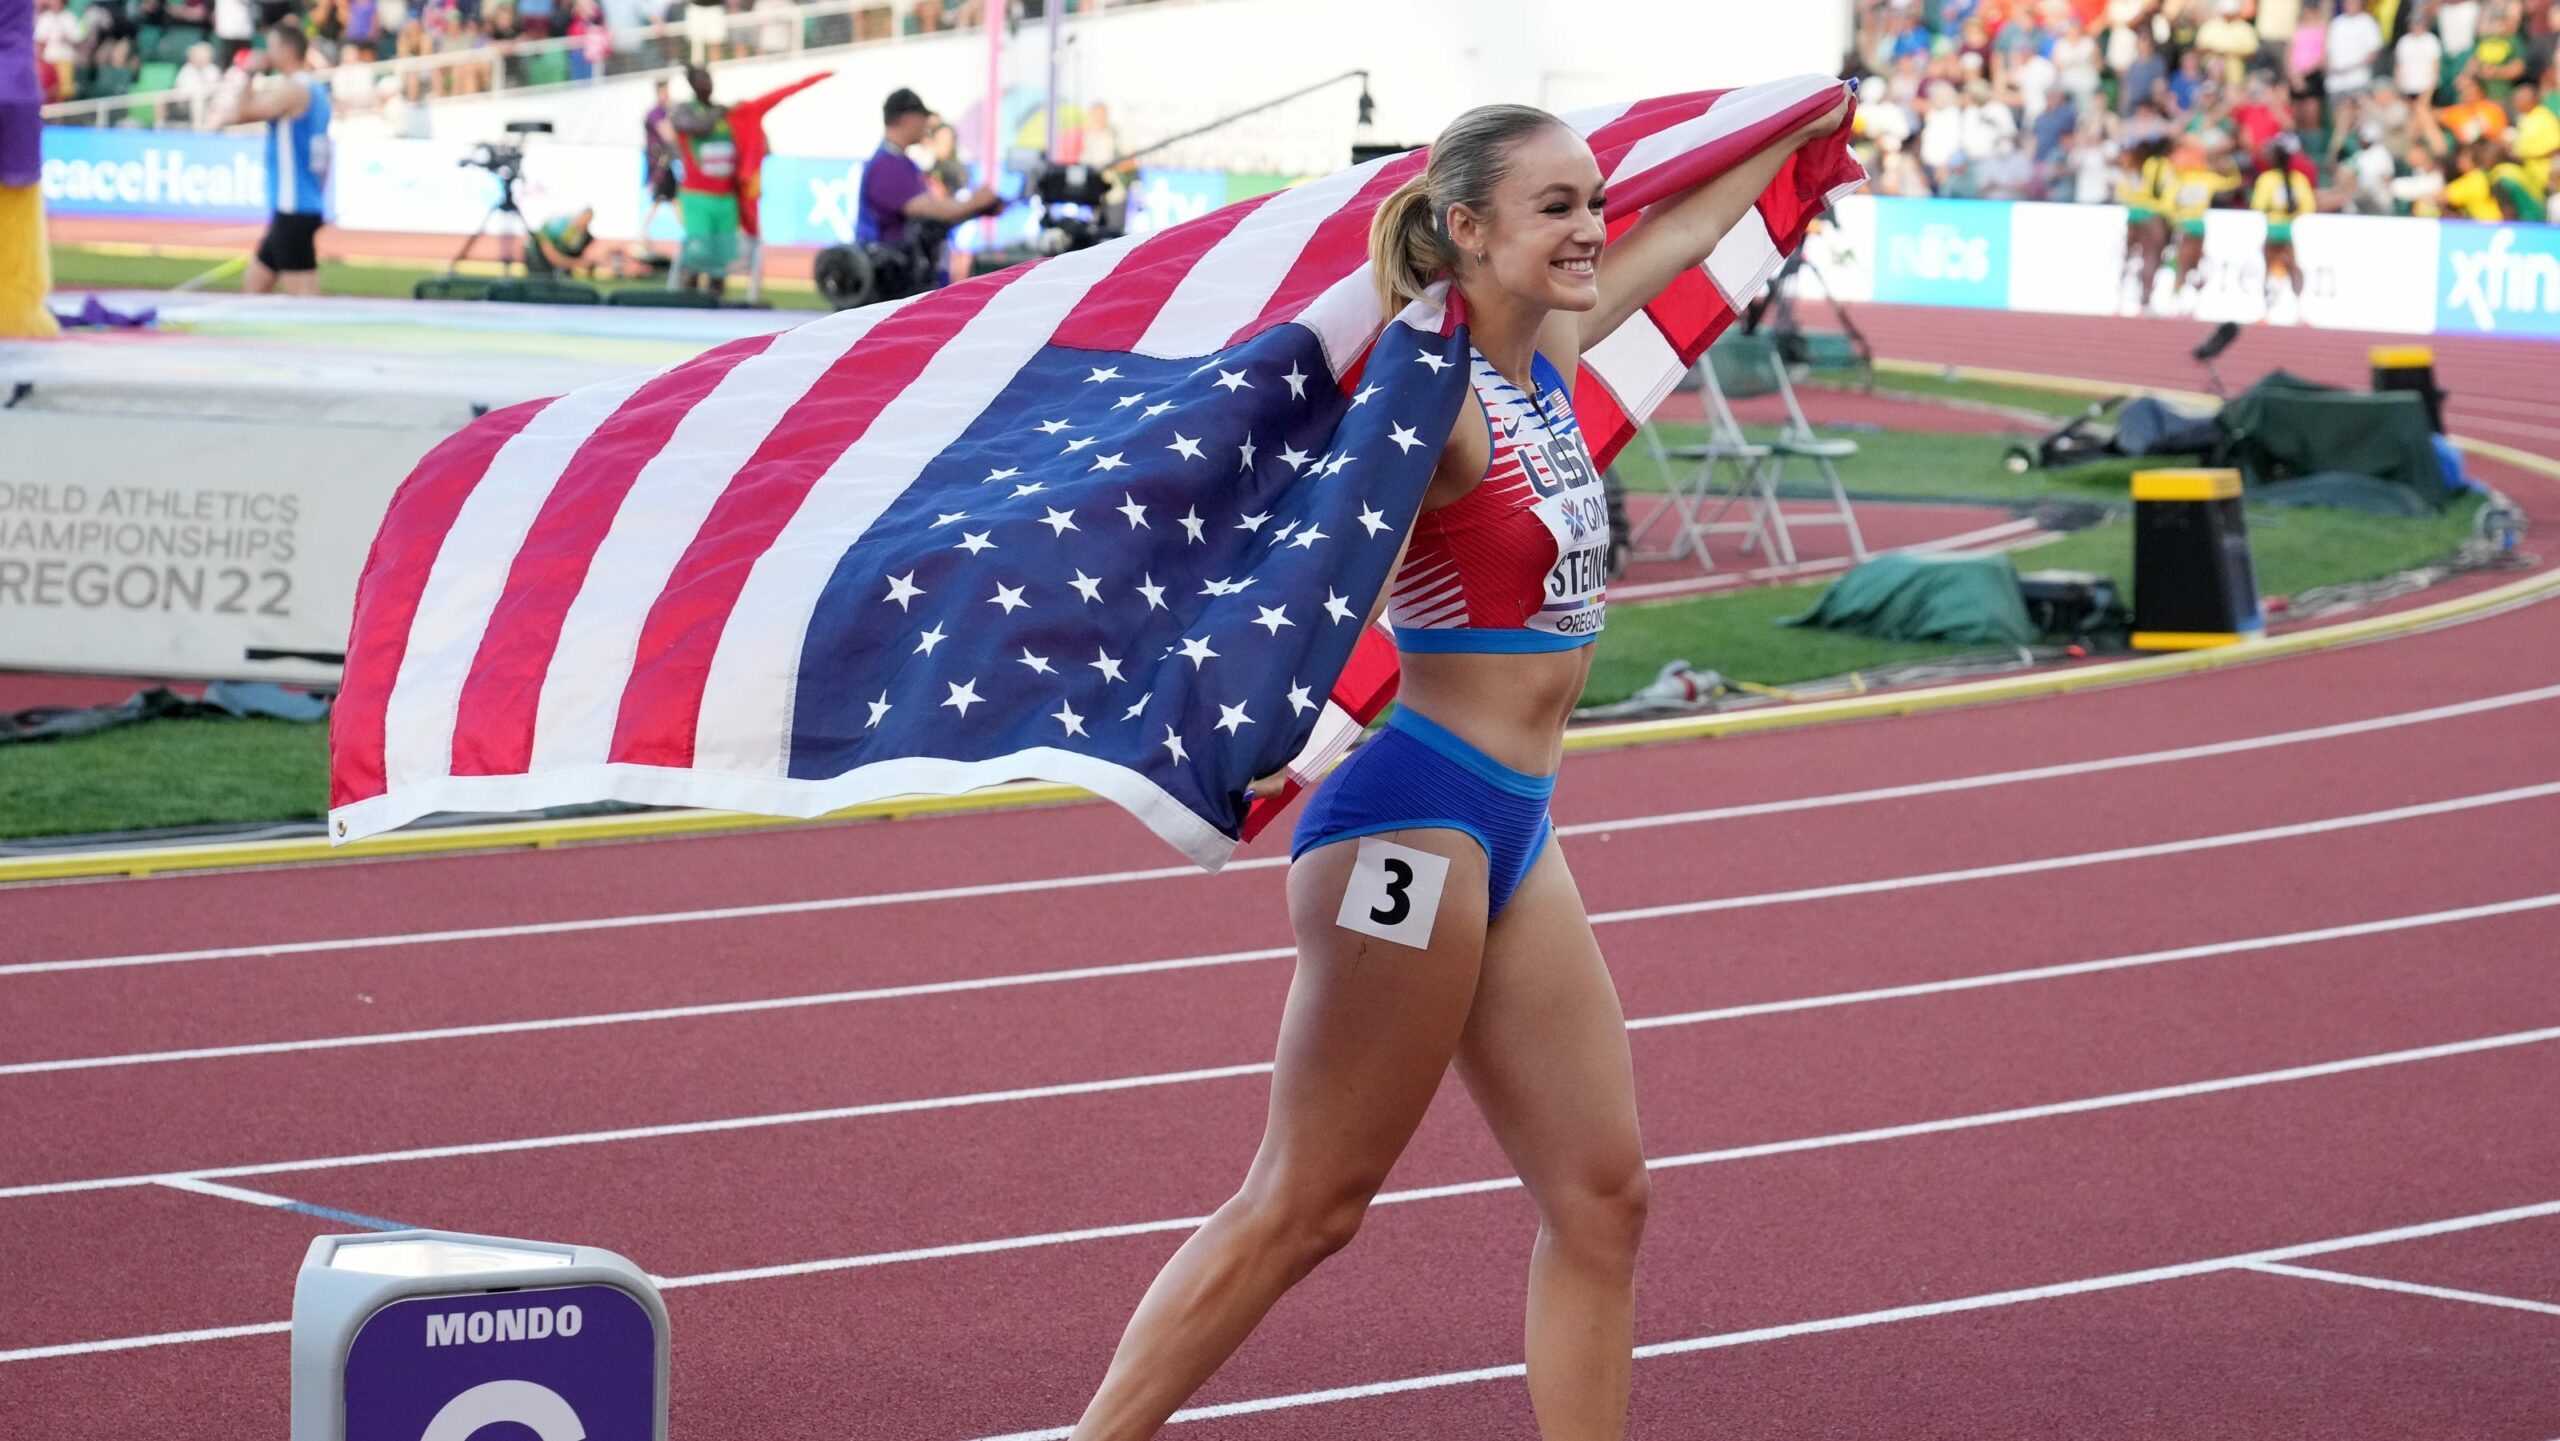 Abby Steiner helps USA win gold in 4x400 meters relay